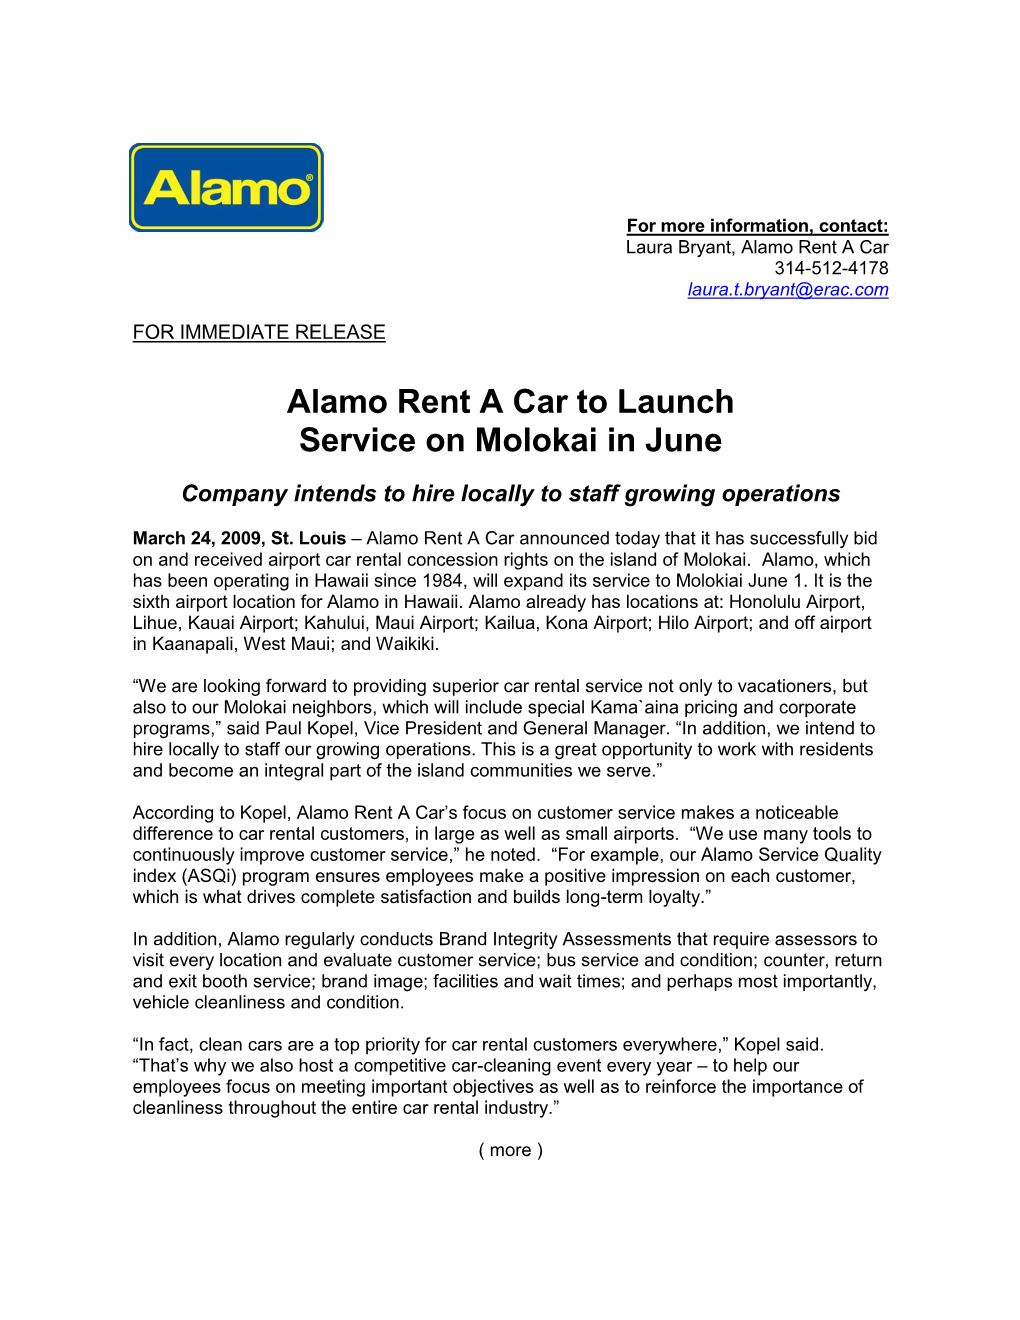 Alamo Rent a Car to Launch Service on Molokai in June